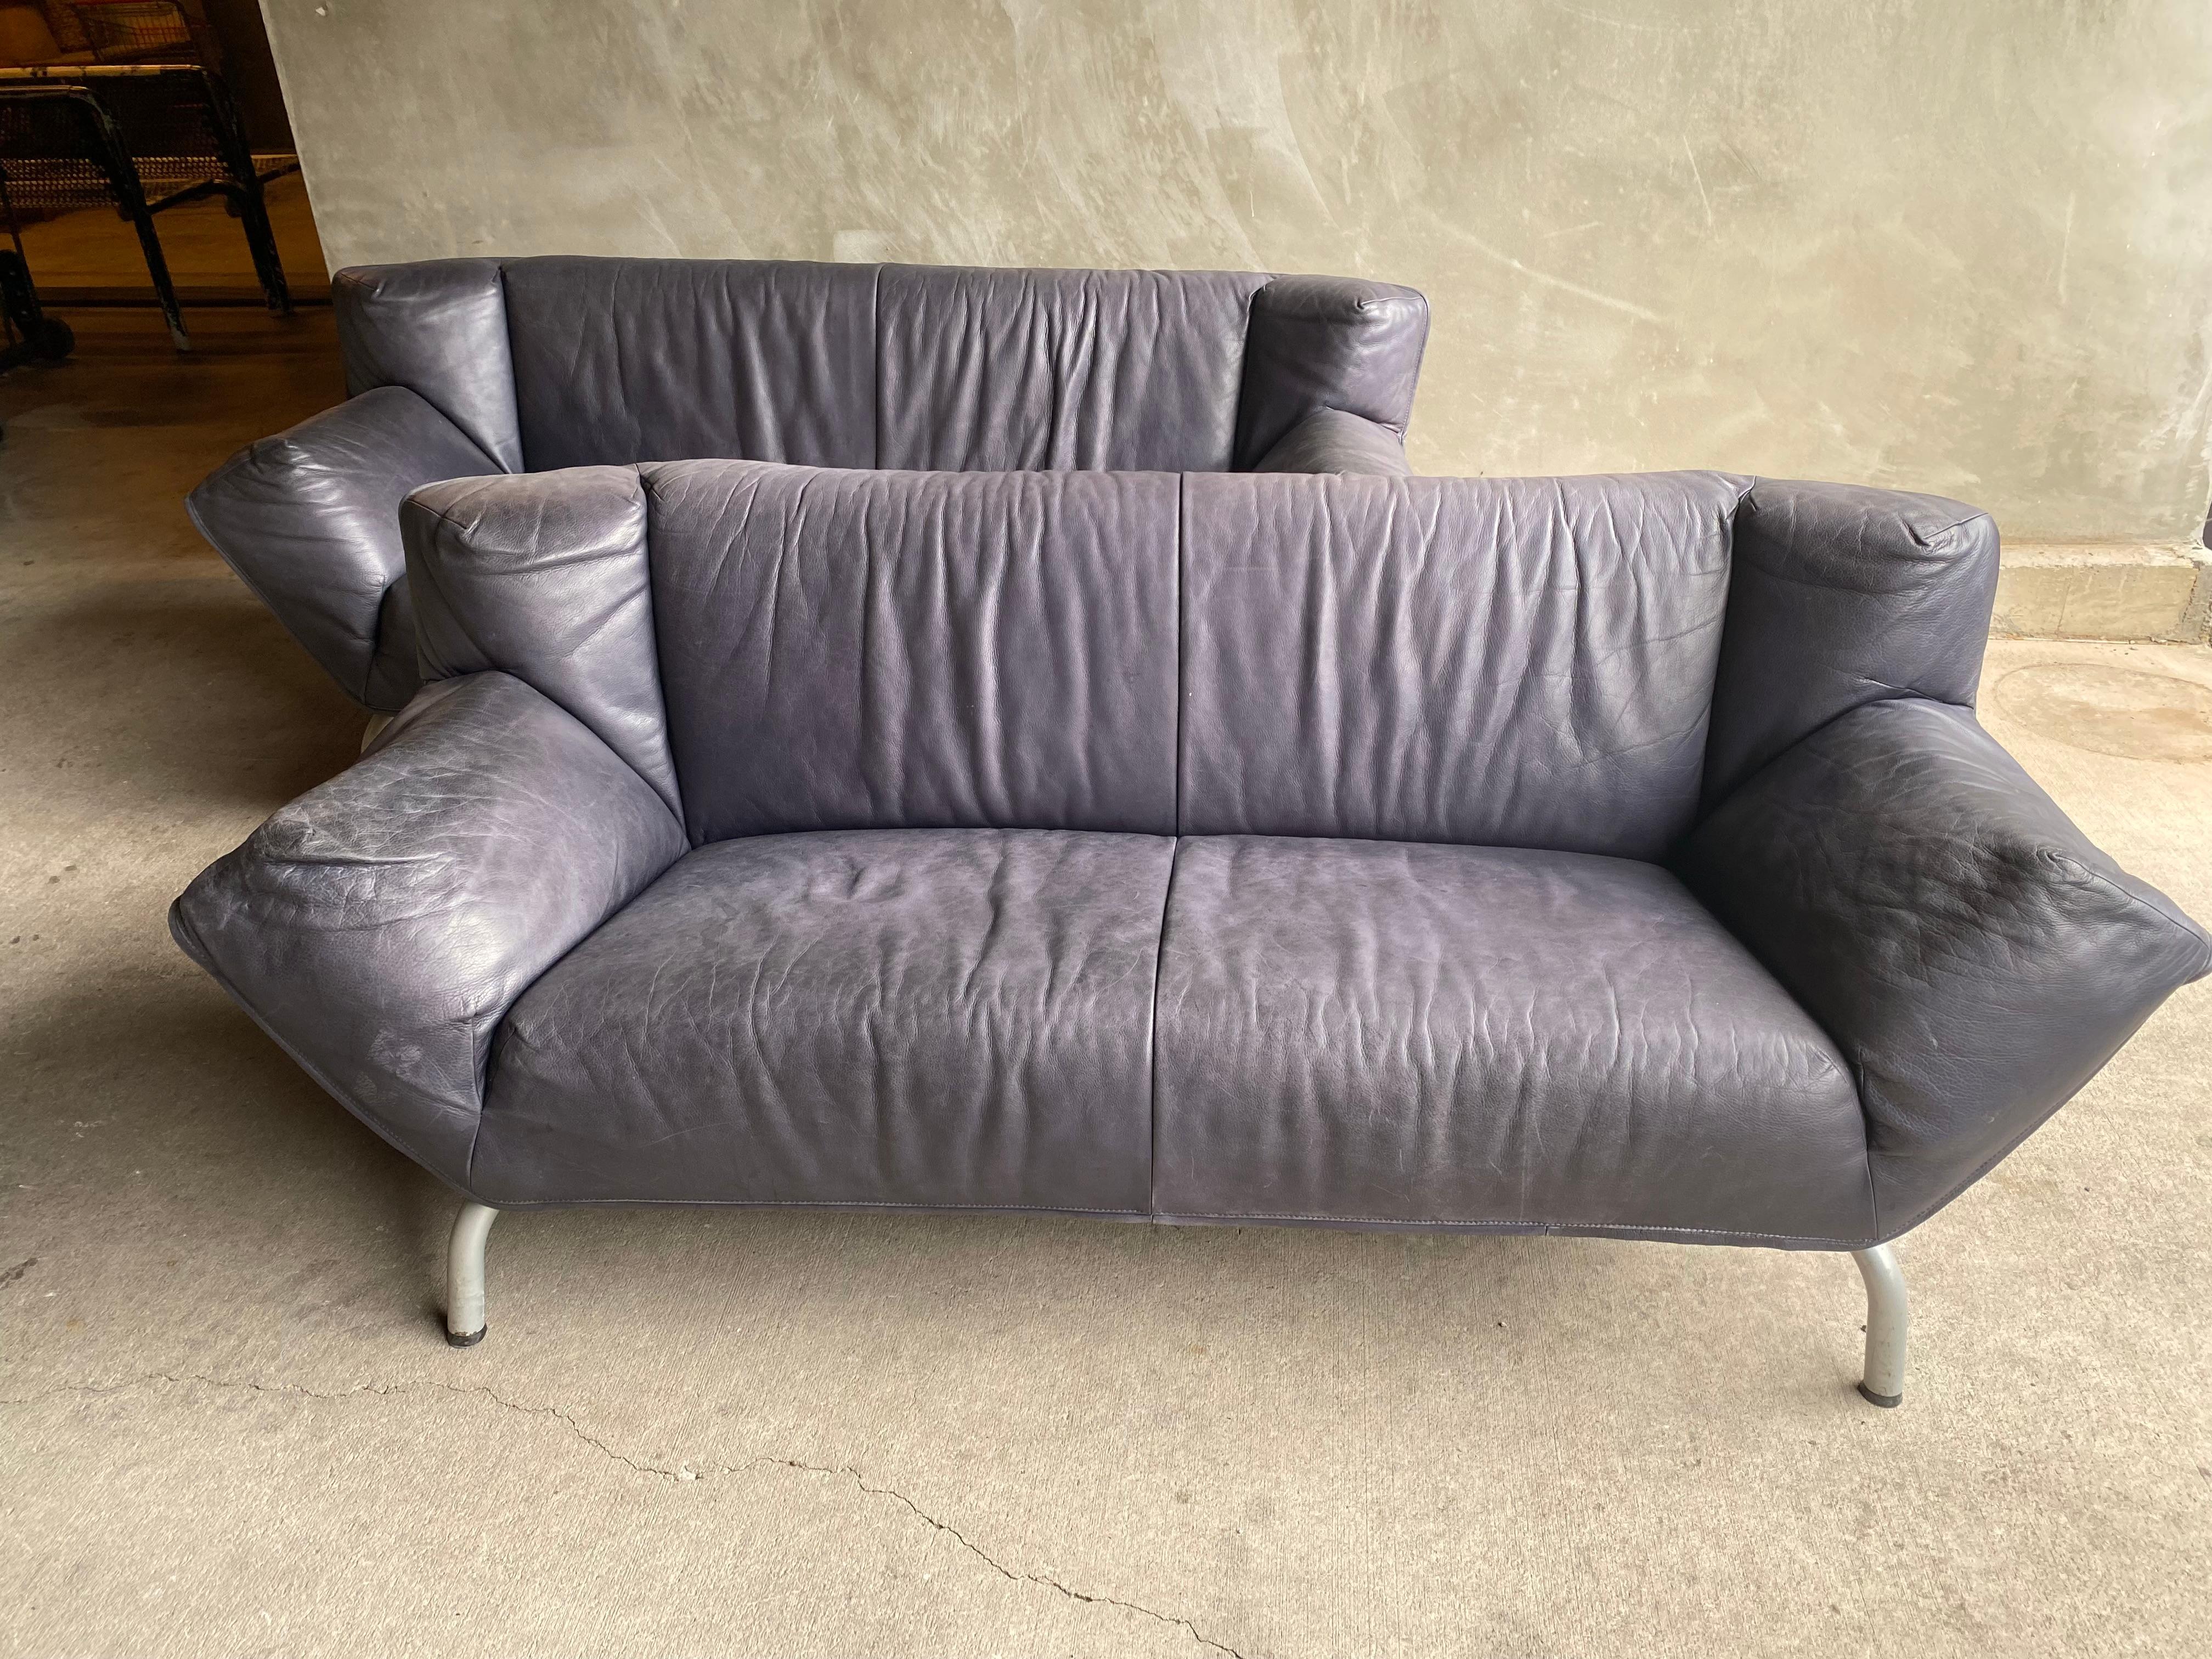 Gerard van den Berg Leather Sofa, NL, 1970-80's, Two Available 6